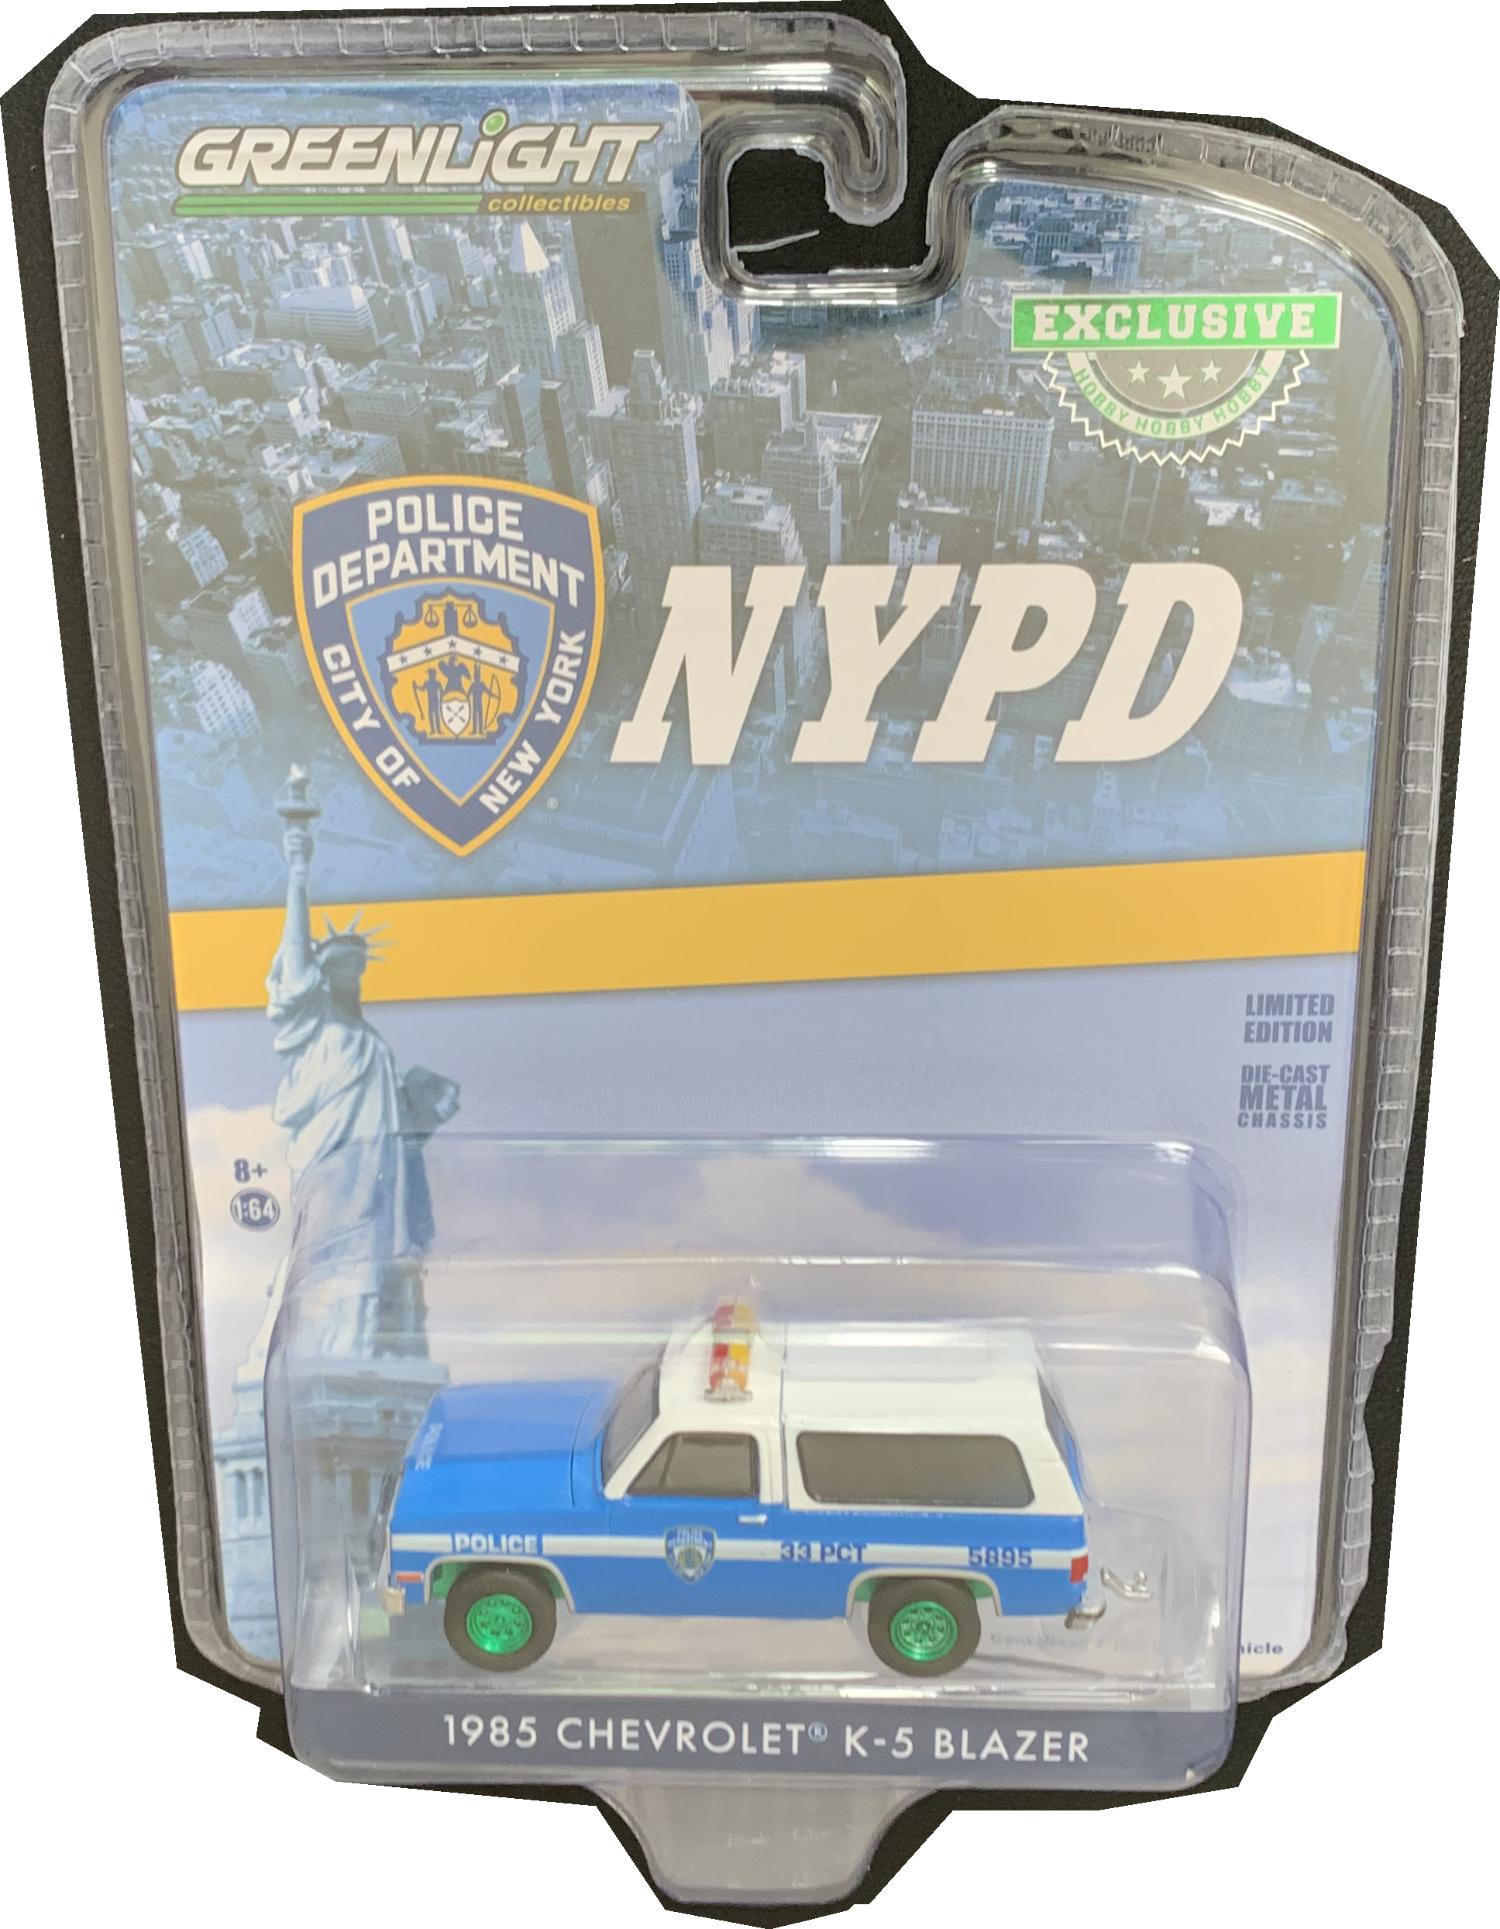 NYPD 1985 Chevrolet K-5 Blazer in blue / white 1:64 scale model from Greenlight, very limited edition model with Green Wheels and underside